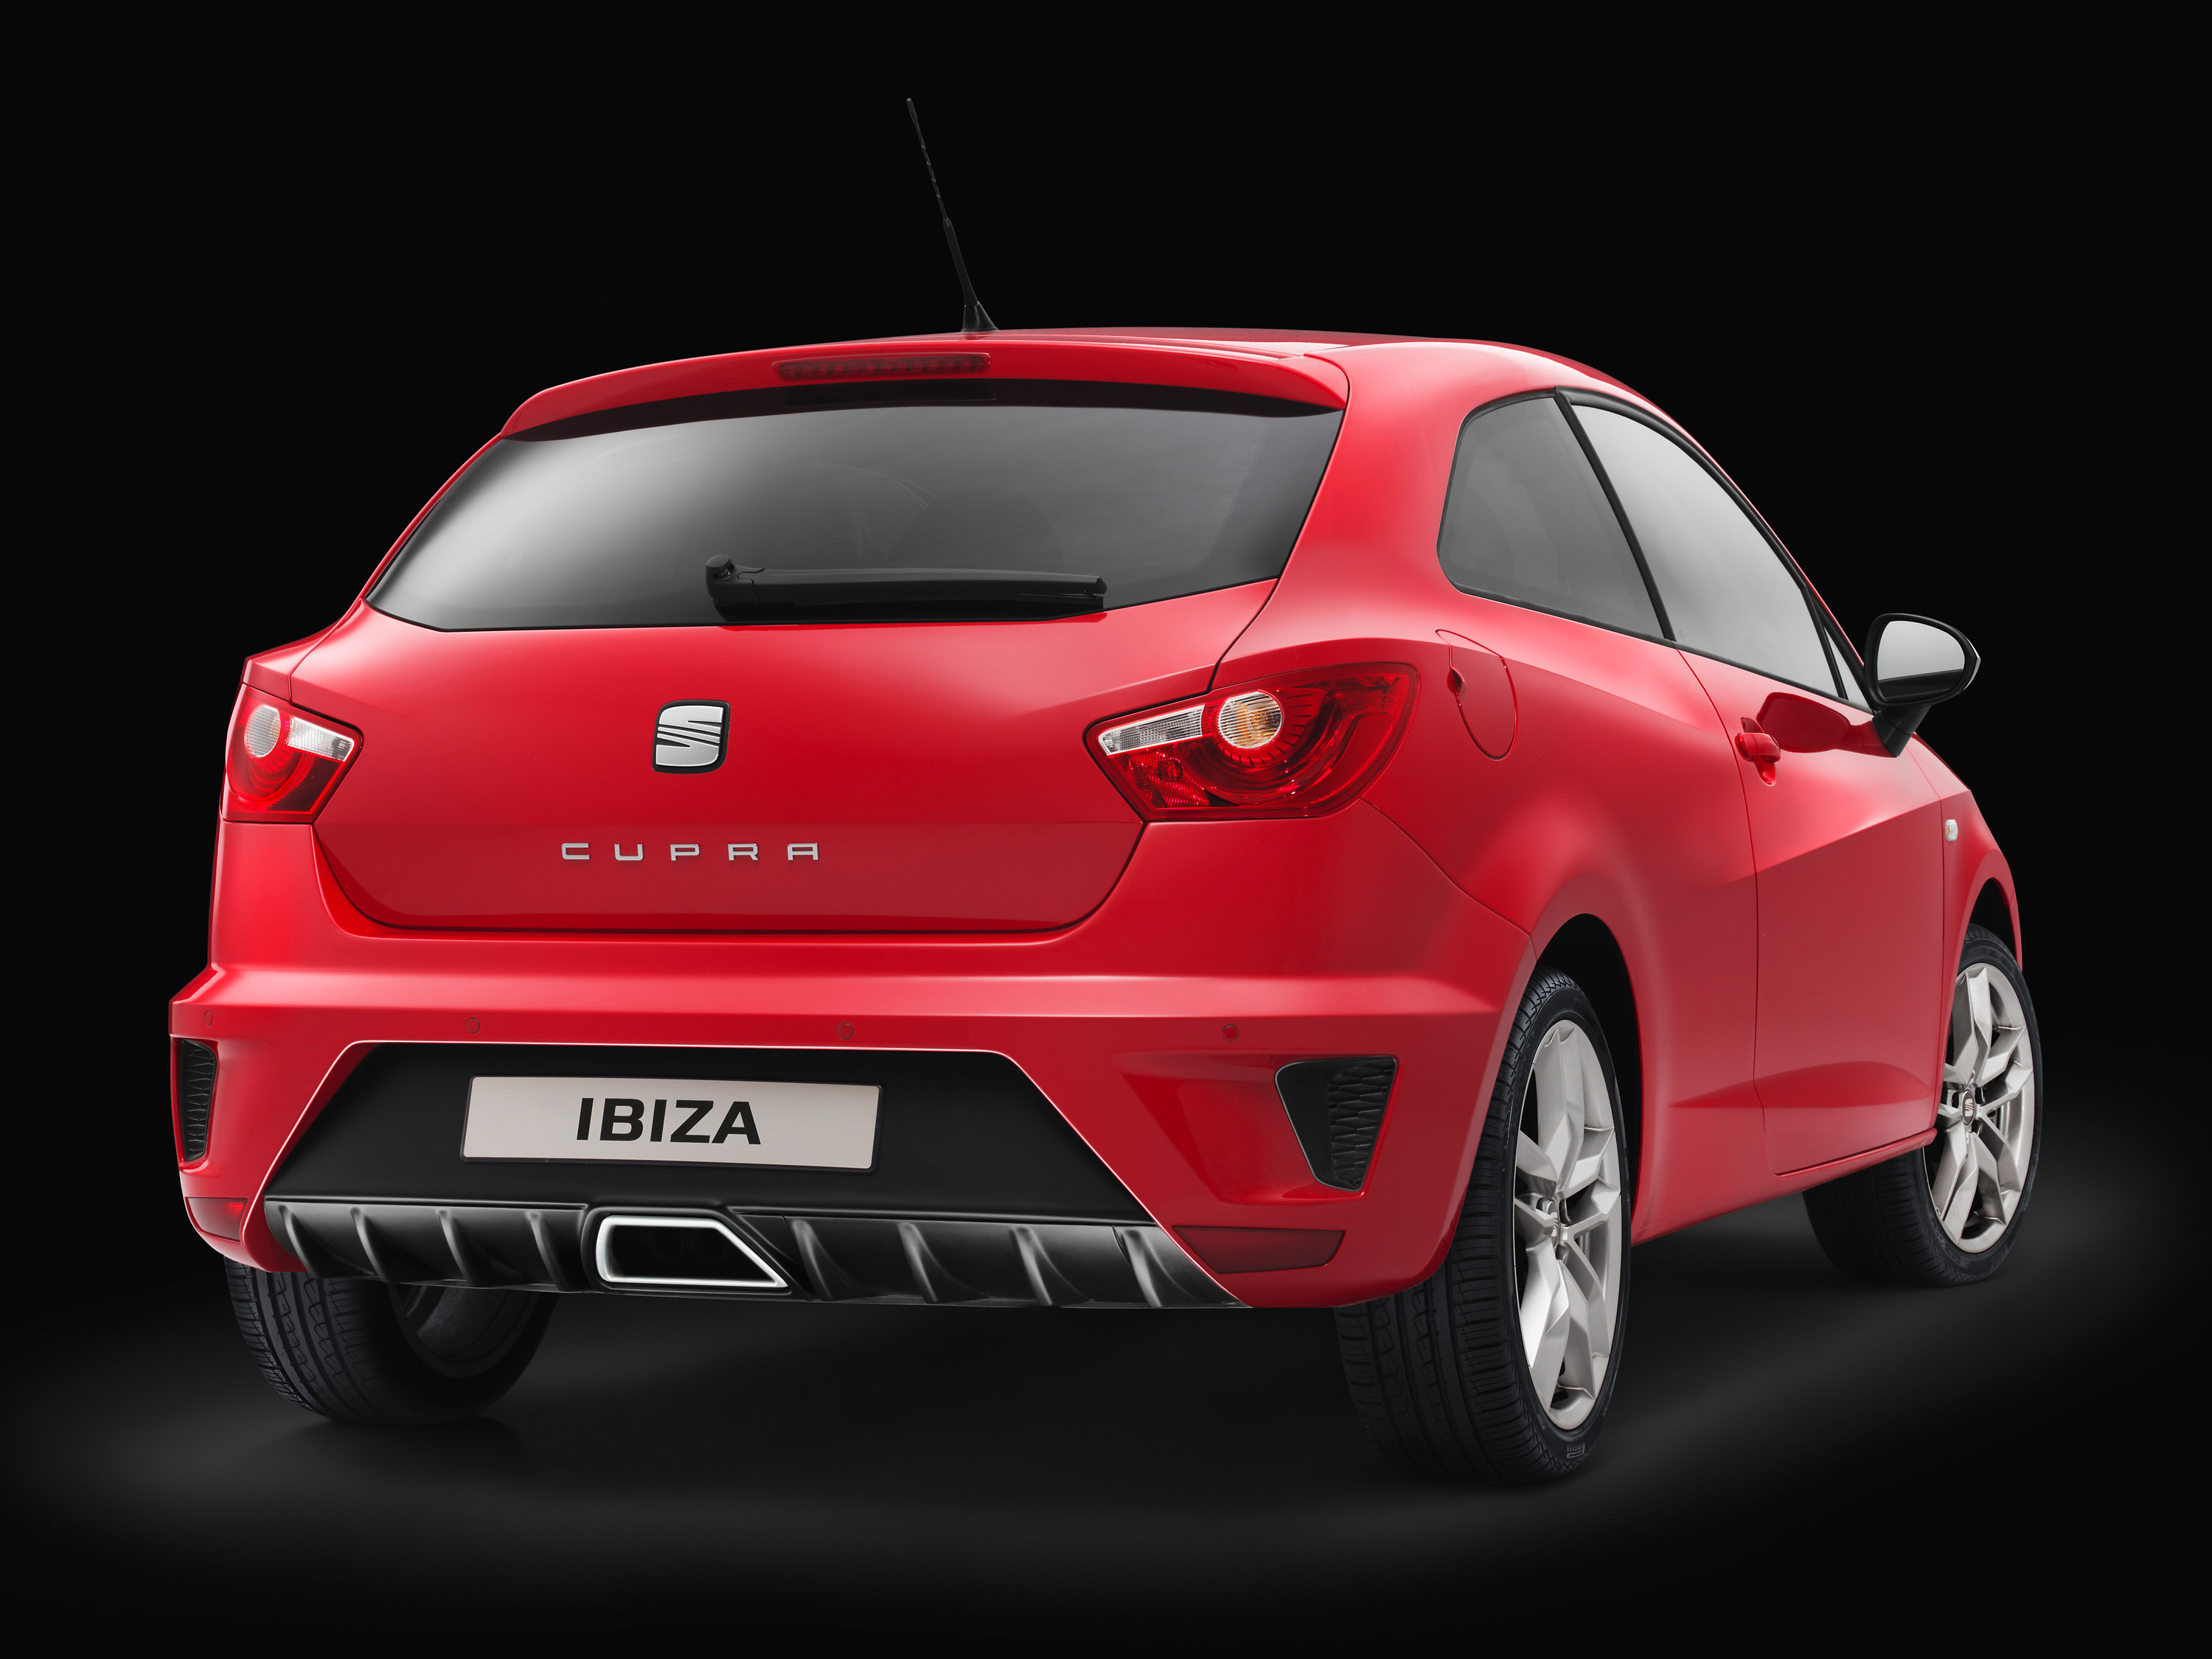 SEAT Ibiza launch events honoured with three prizes